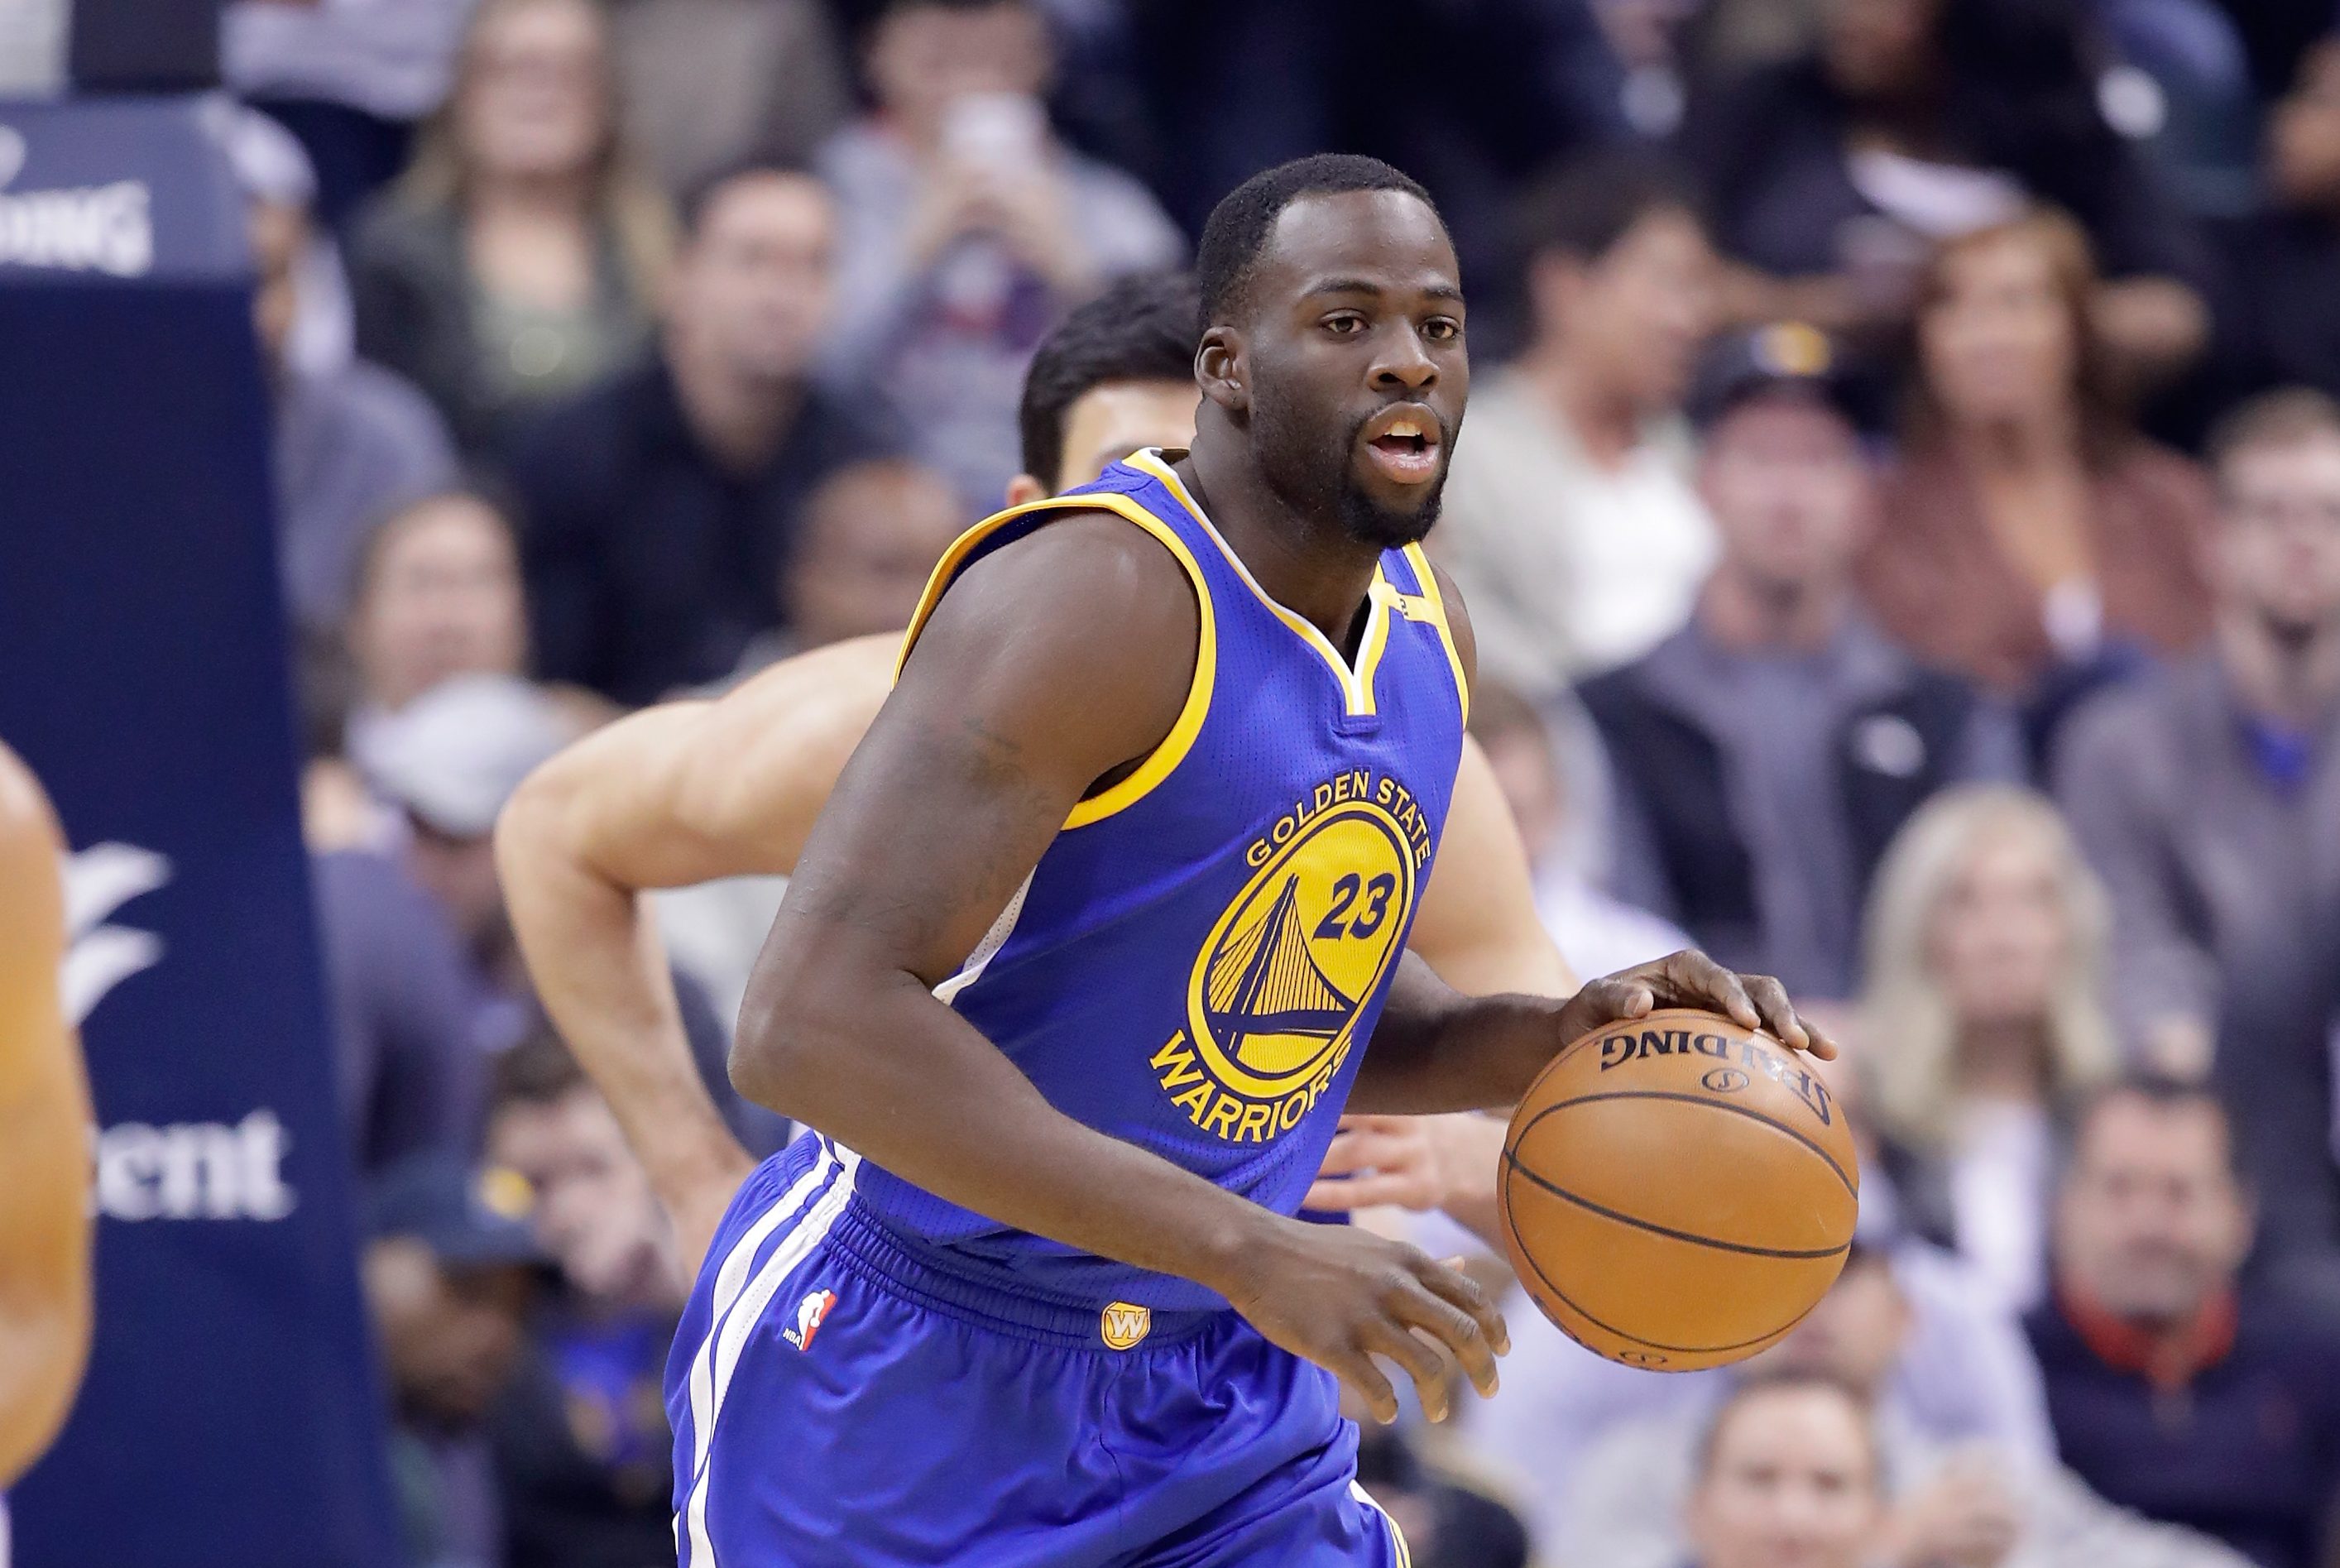 Lakers vs. Warriors Live Stream How to Watch Online